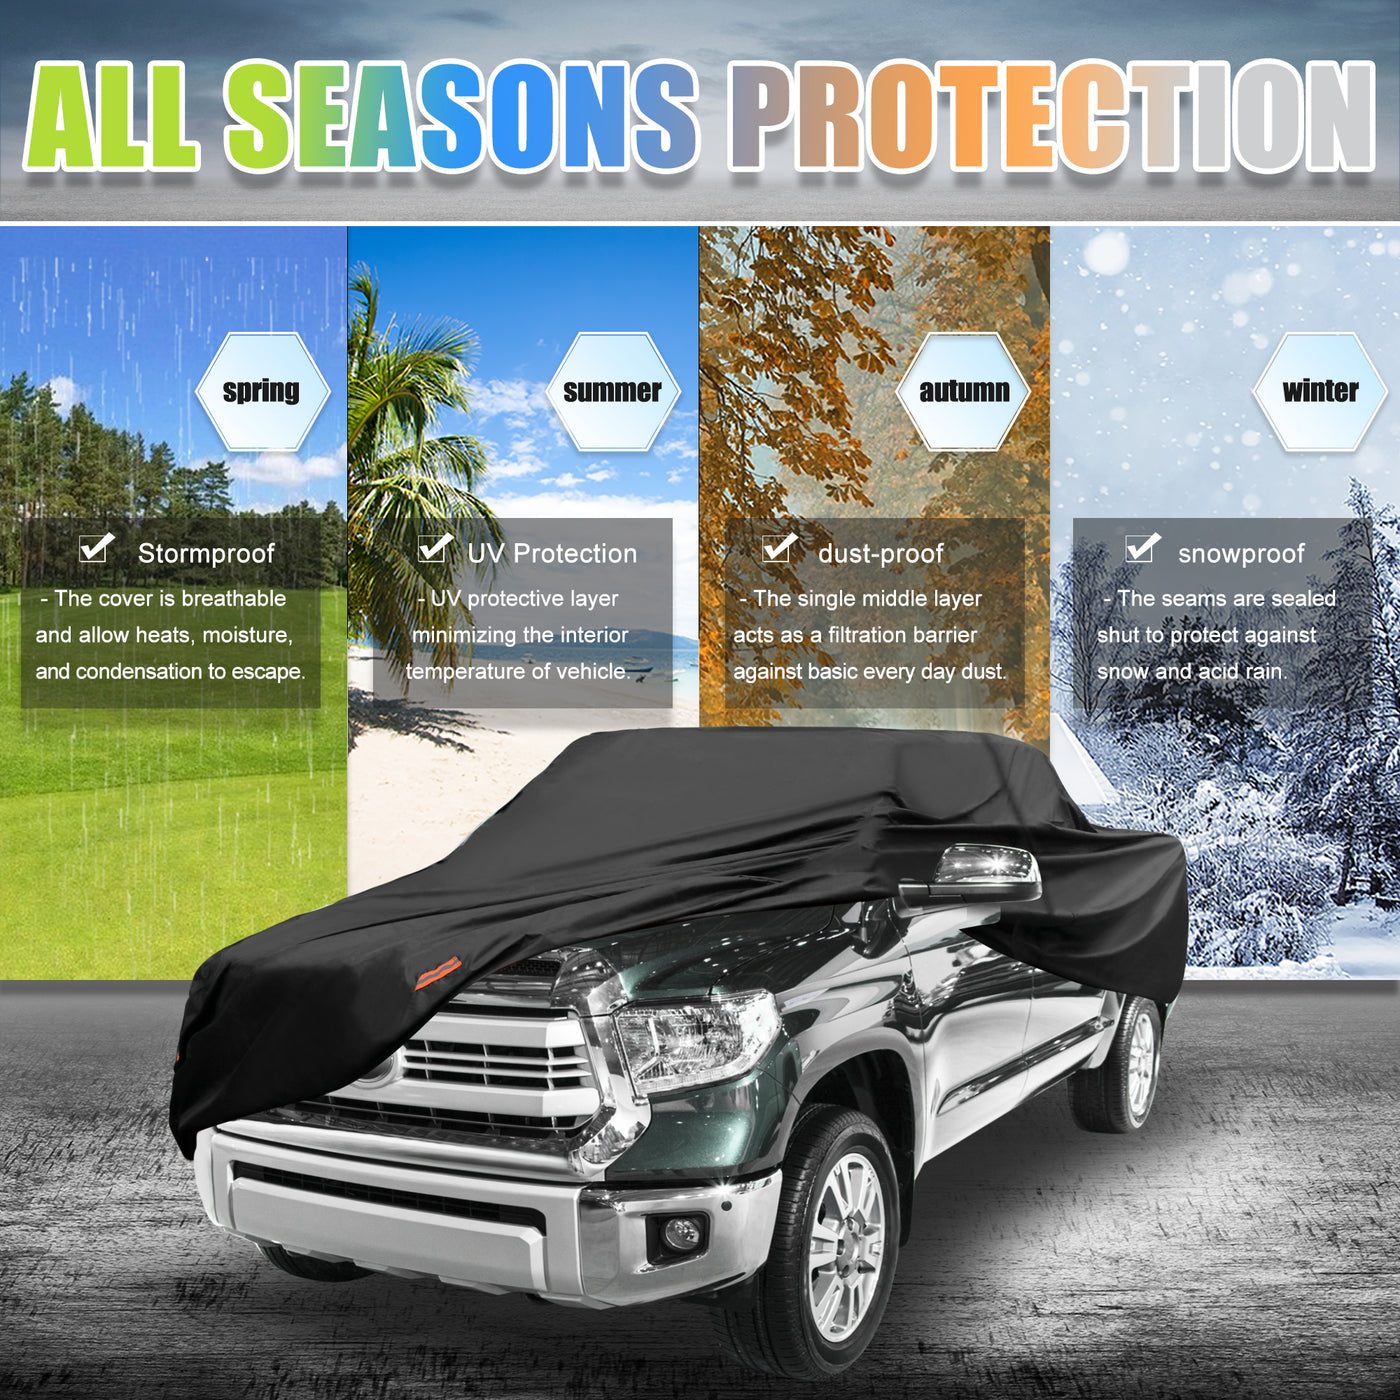 X AUTOHAUX Pickup Truck Car Cover for Toyota Tacoma Crew Cab Pickup 4 Door 6.1 Feet Bed 05-21 Outdoor Waterproof Sun Rain Dust Wind Snow Protection 190T PU with Driver Door Zipper